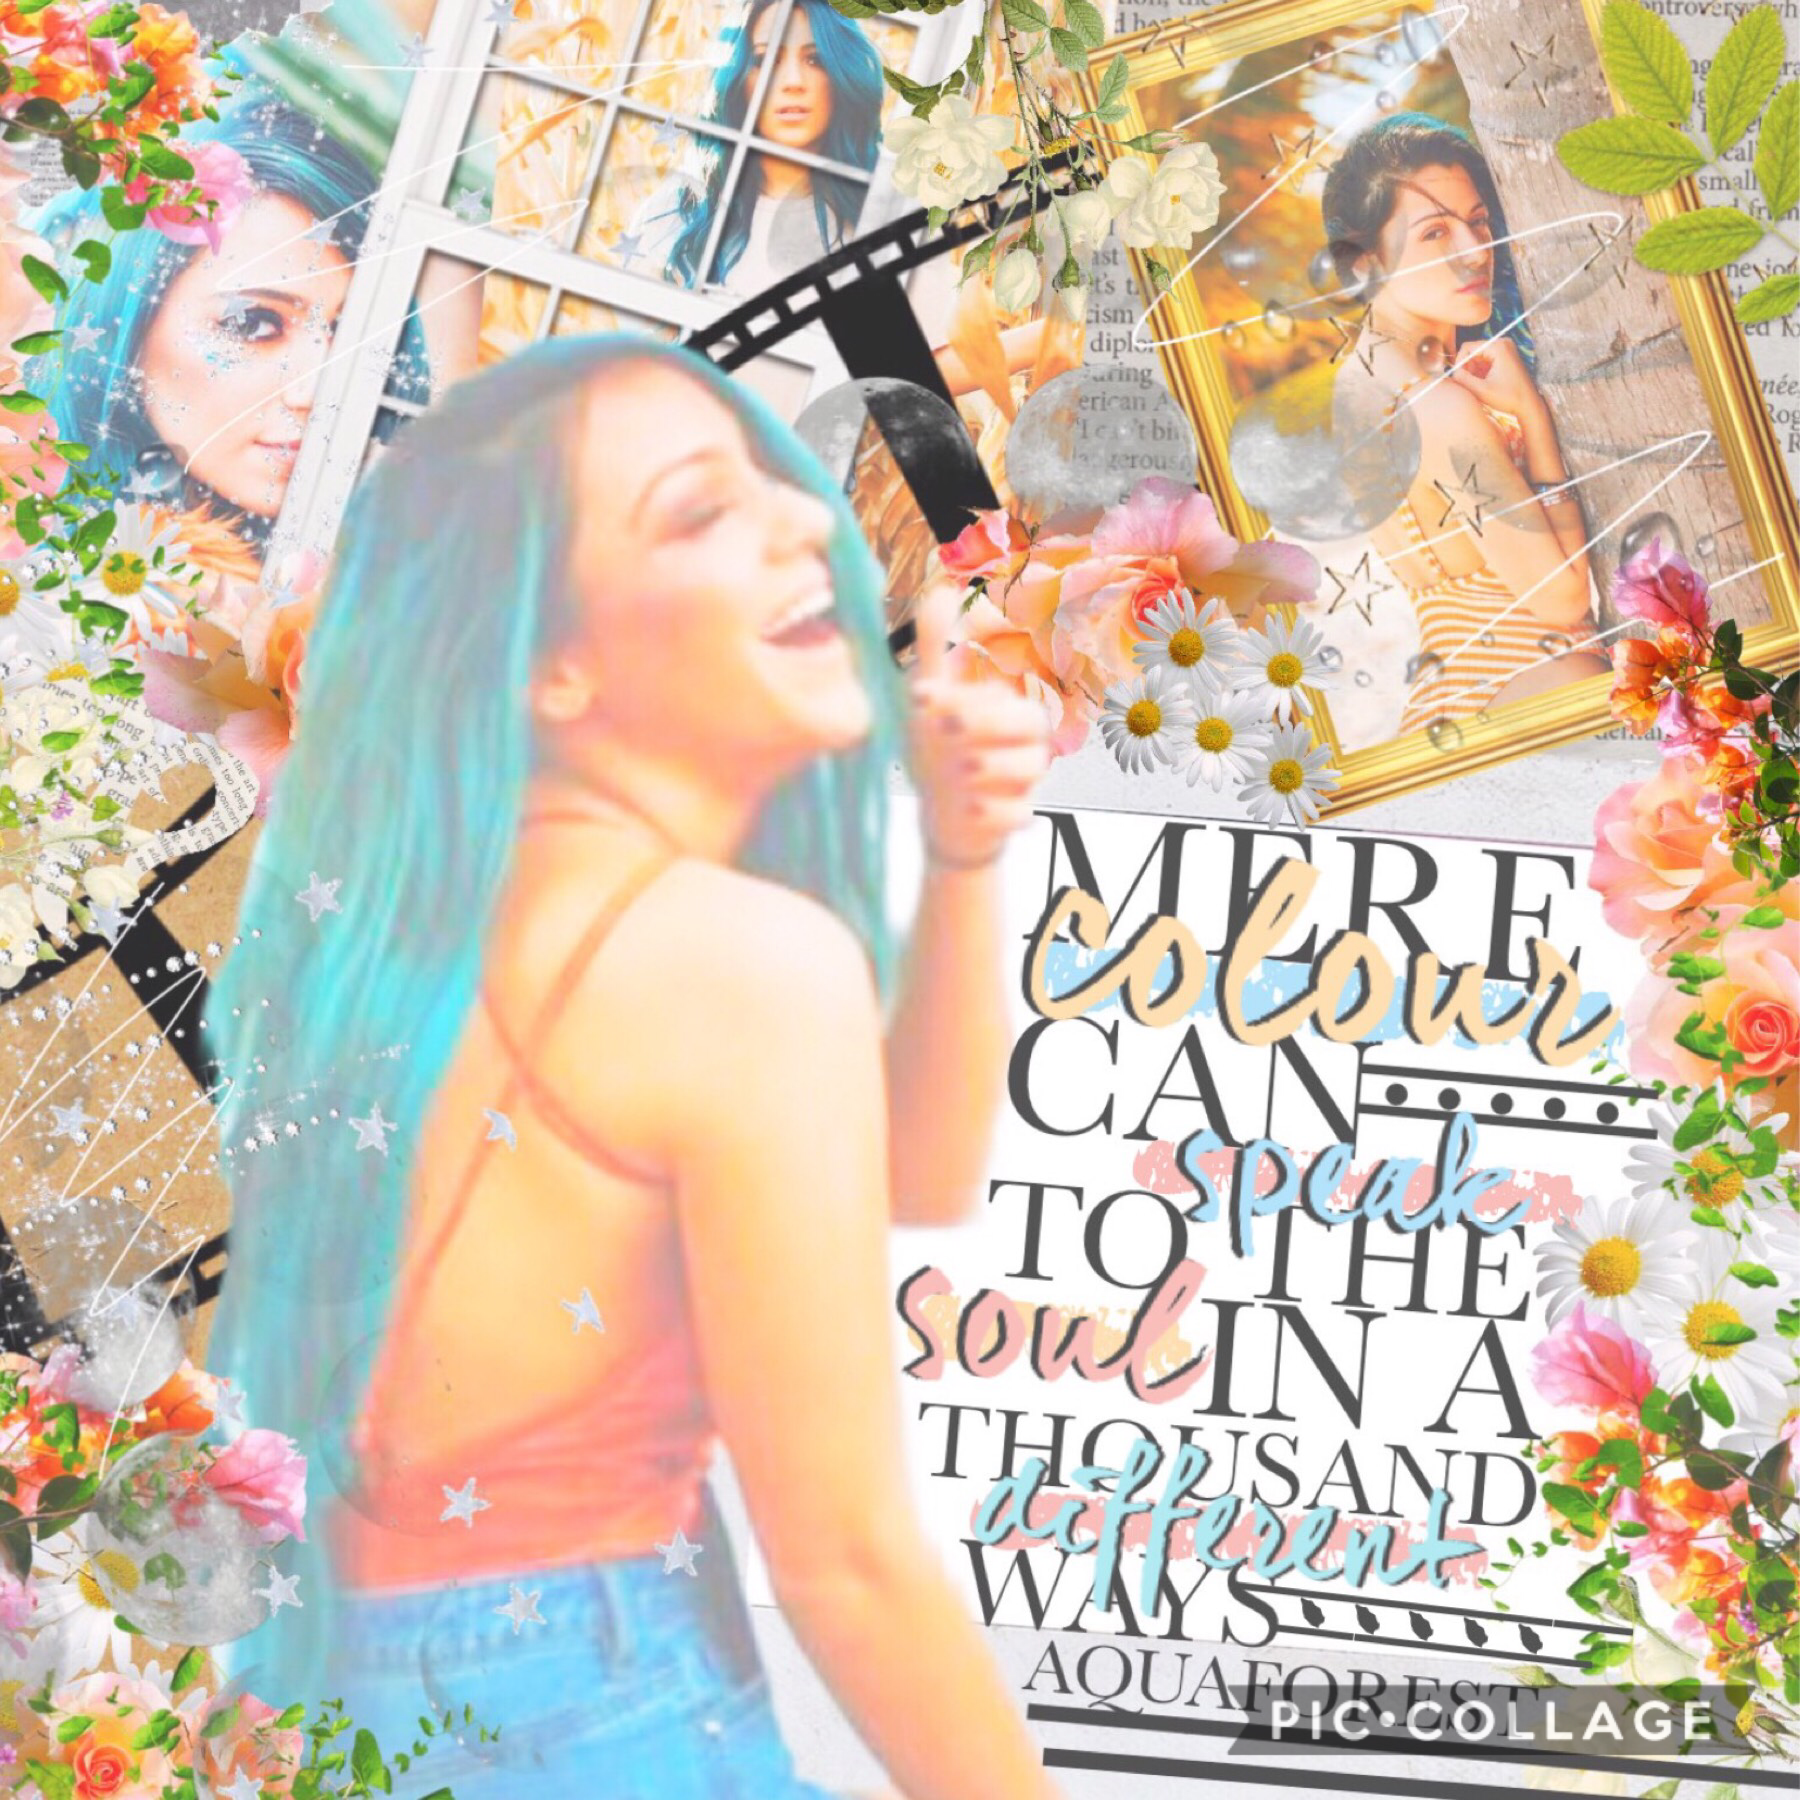 TAP
this is my entry for AlishaMarieSummer-Extra ‘s YouTuber games!
I’m on team niki demar :)
voting will be up soon 😬
That old pc font is so pretty I wish it could come back
Shoutout to @clear-blue-water and @arianaedits123 for always supporting me 🙃